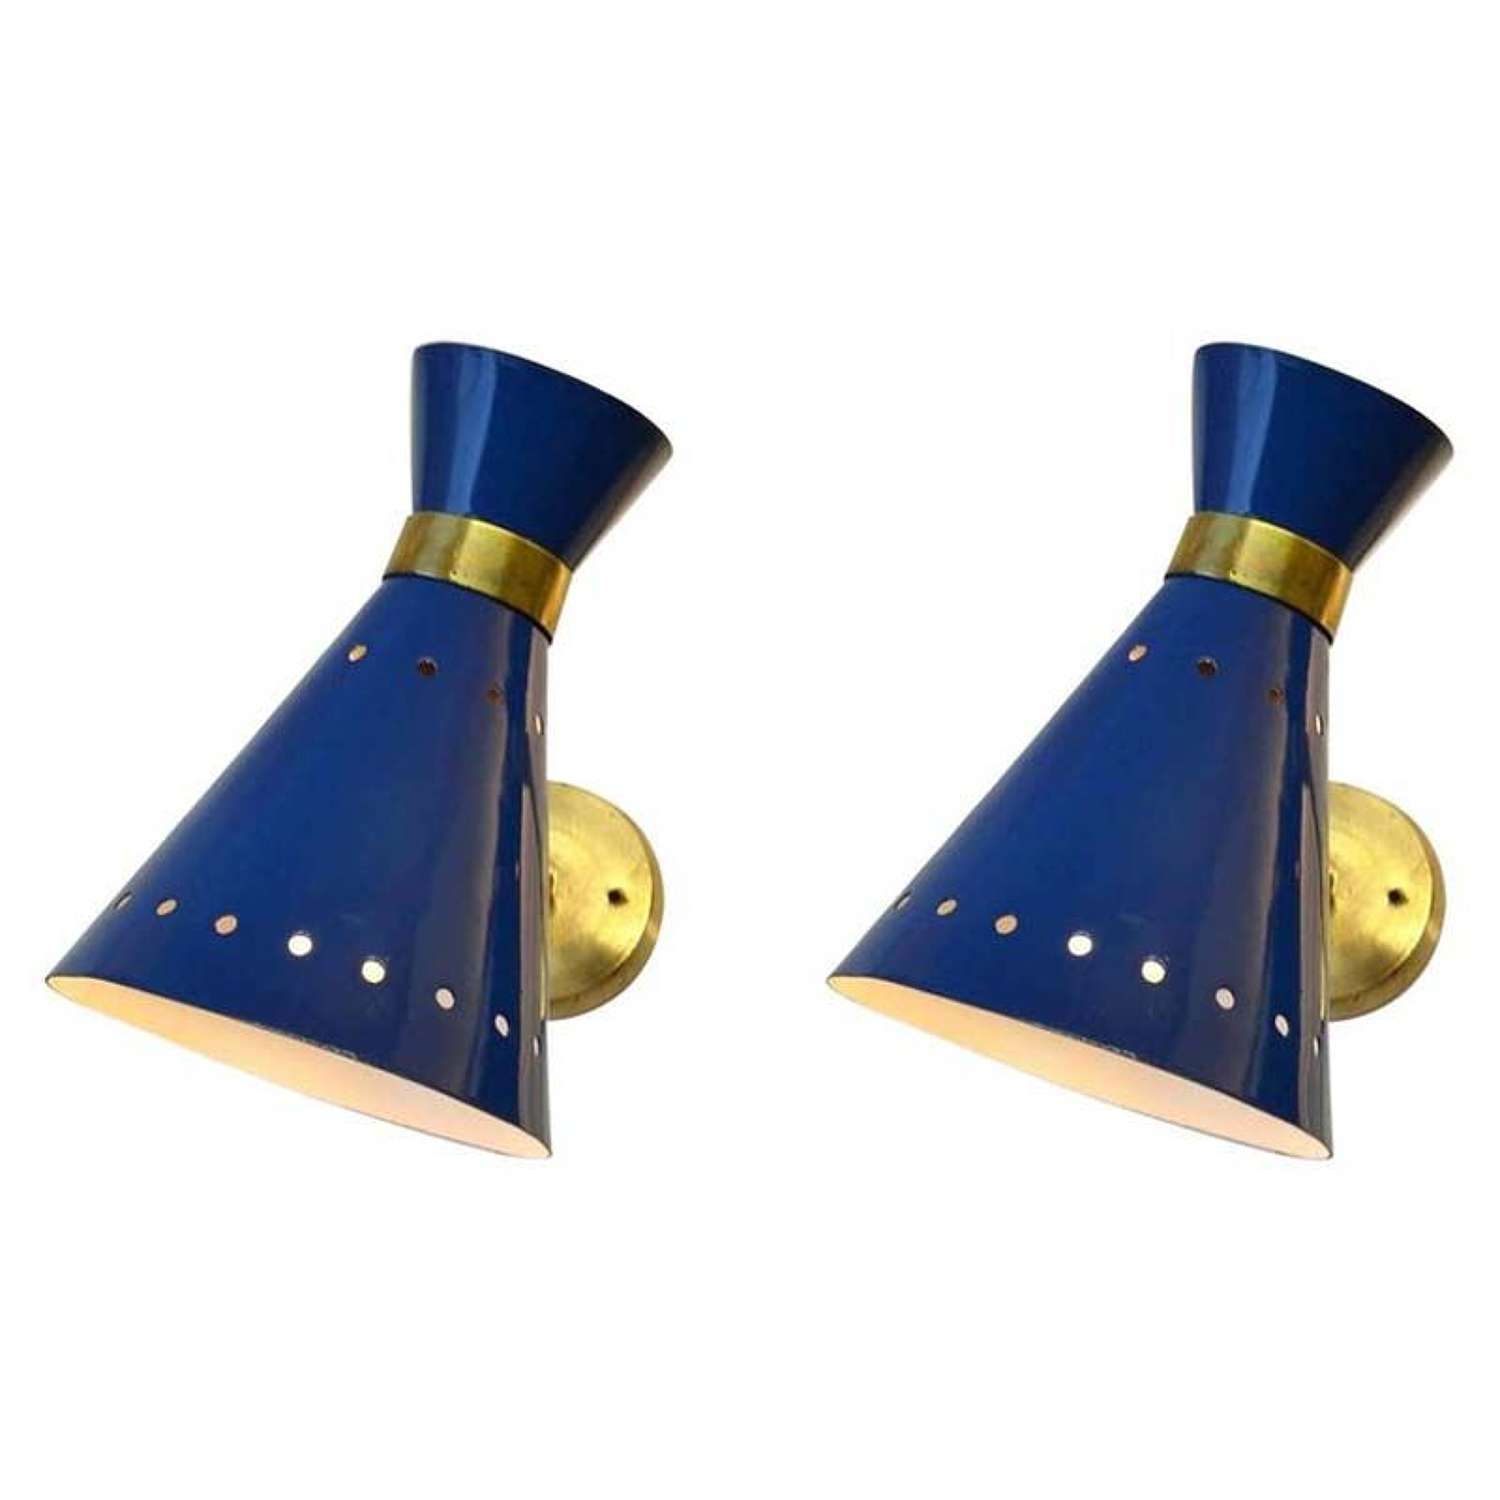 Modern Pair of Blue & Brass Sconces, Italy 1960's